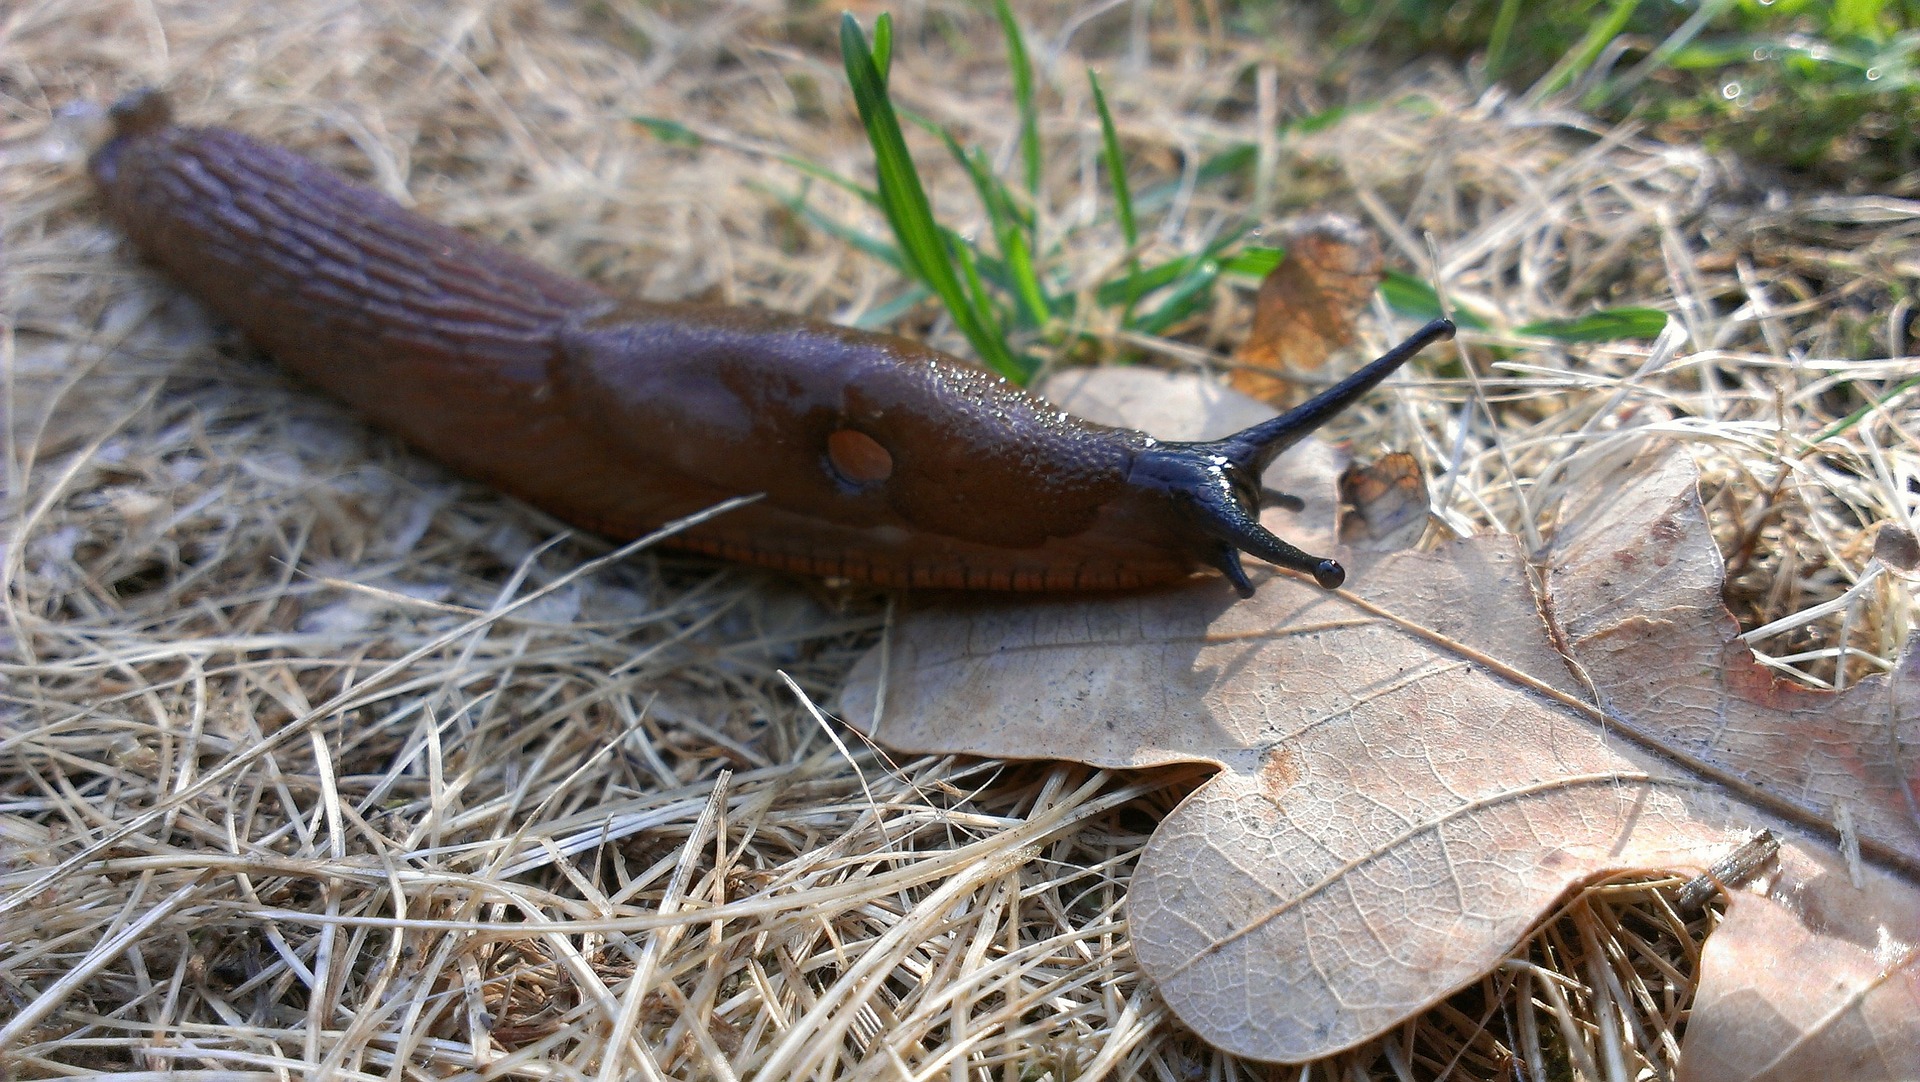 Slugs: Identifying, Controlling, and Getting Rid of Garden Pests ...